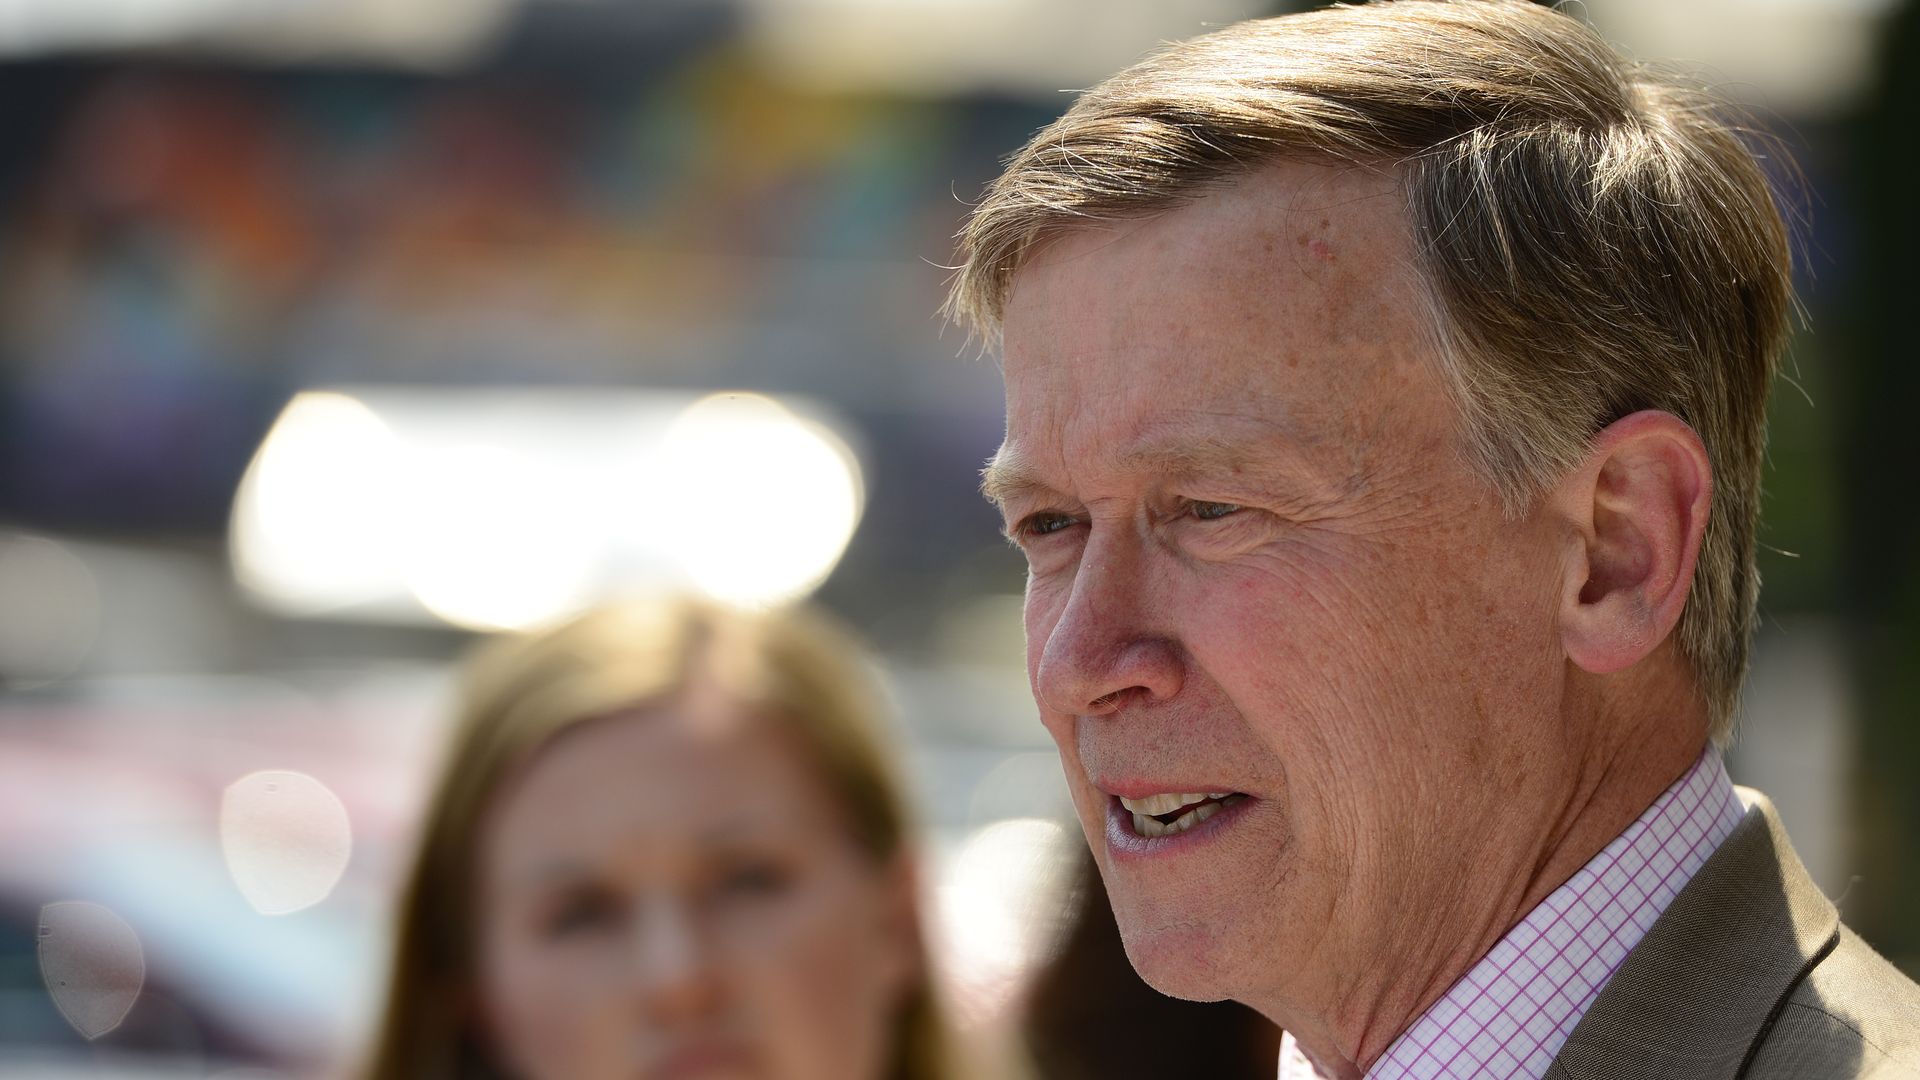 Hickenlooper faces opposition because of oil and gas support.